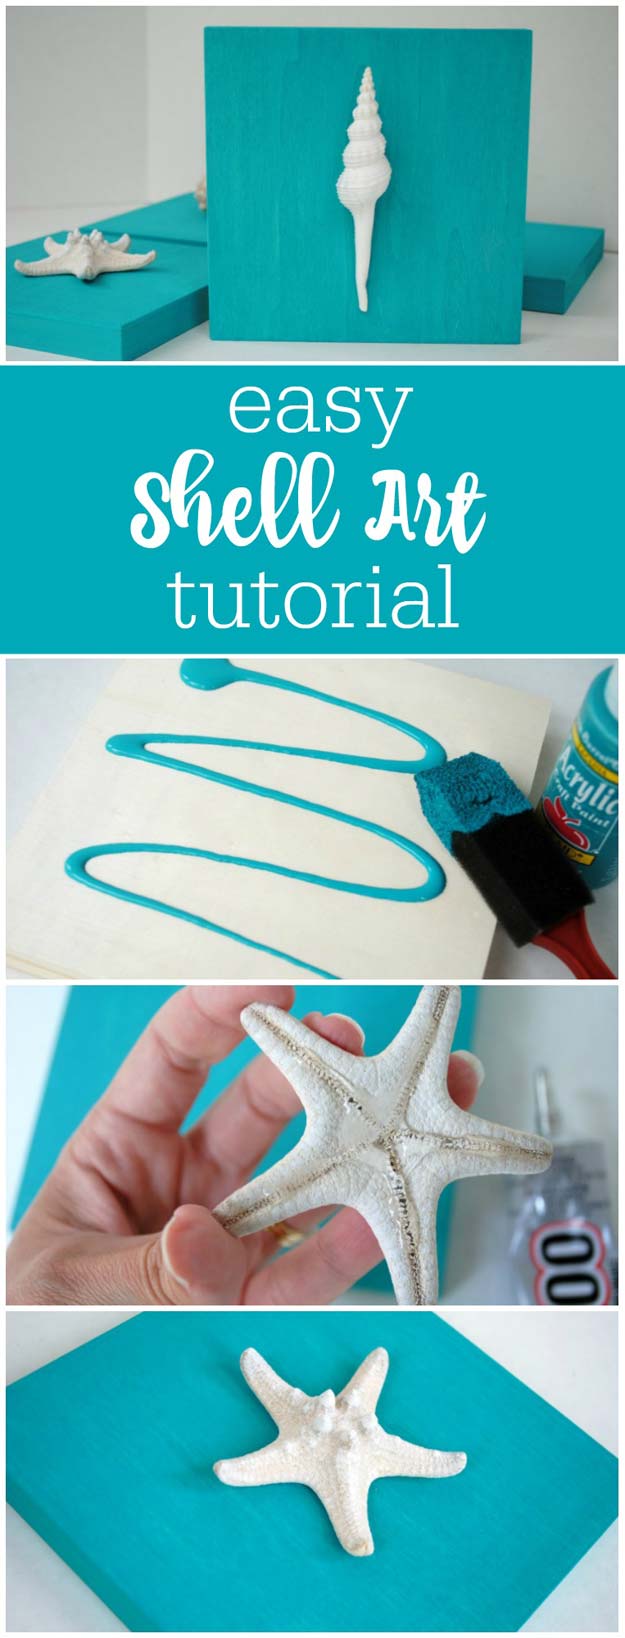 DIY Bathroom Decor Ideas for Teens - Easy Peasy Shell Art - Best Creative, Cool Bath Decorations and Accessories for Teenagers - Easy, Cheap, Cute and Quick Craft Projects That Are Fun To Make. Easy to Follow Step by Step Tutorials 